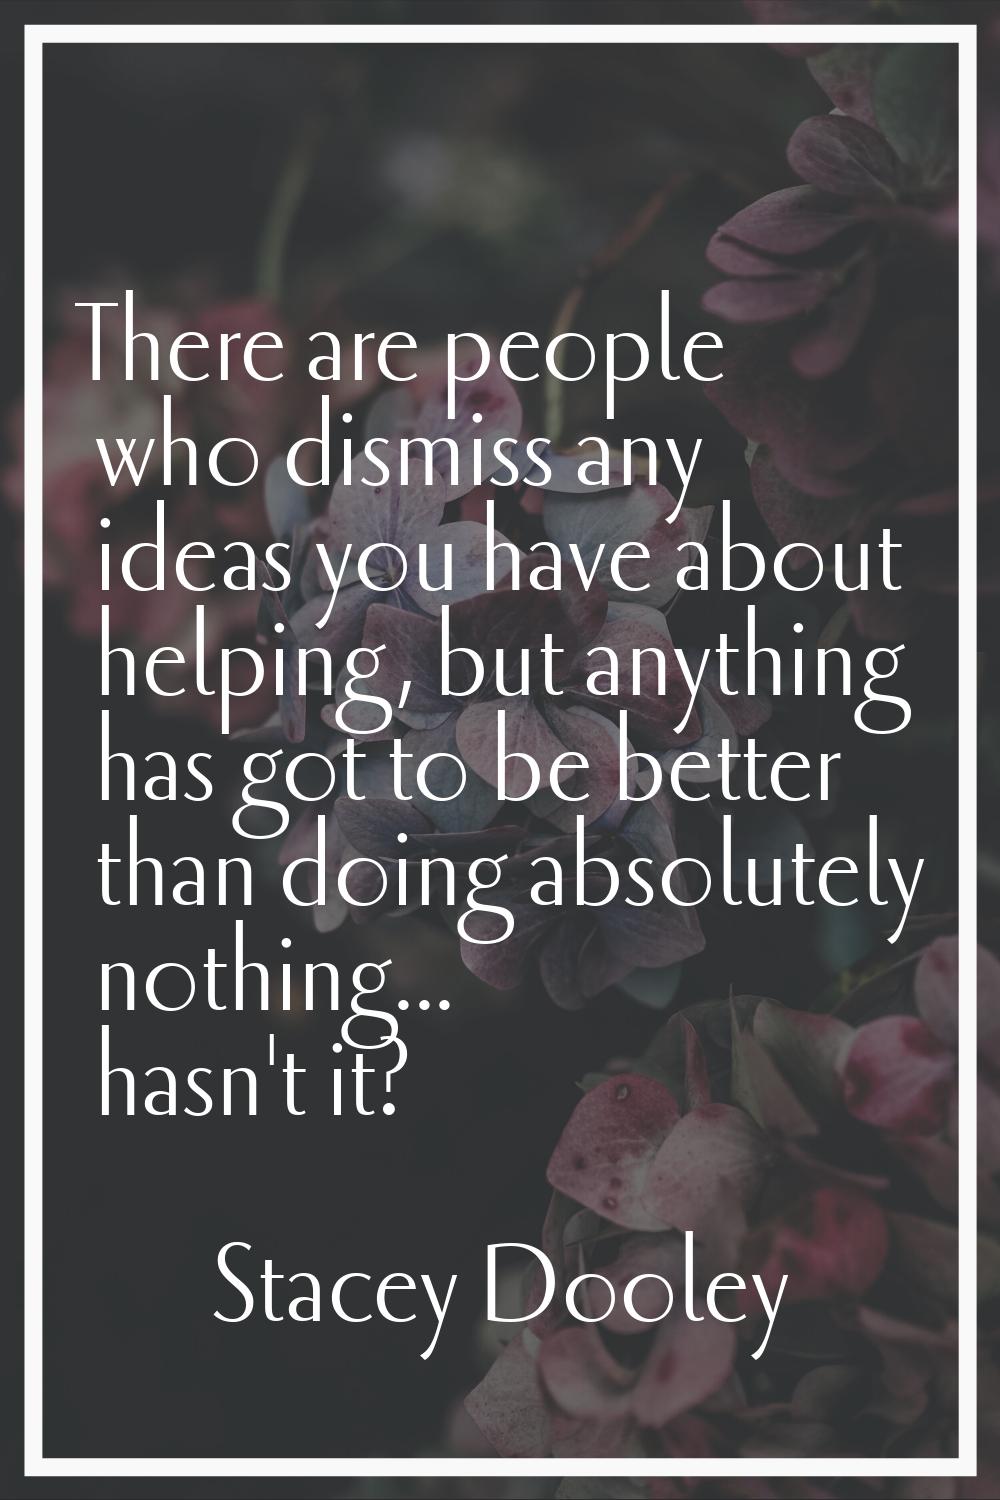 There are people who dismiss any ideas you have about helping, but anything has got to be better th